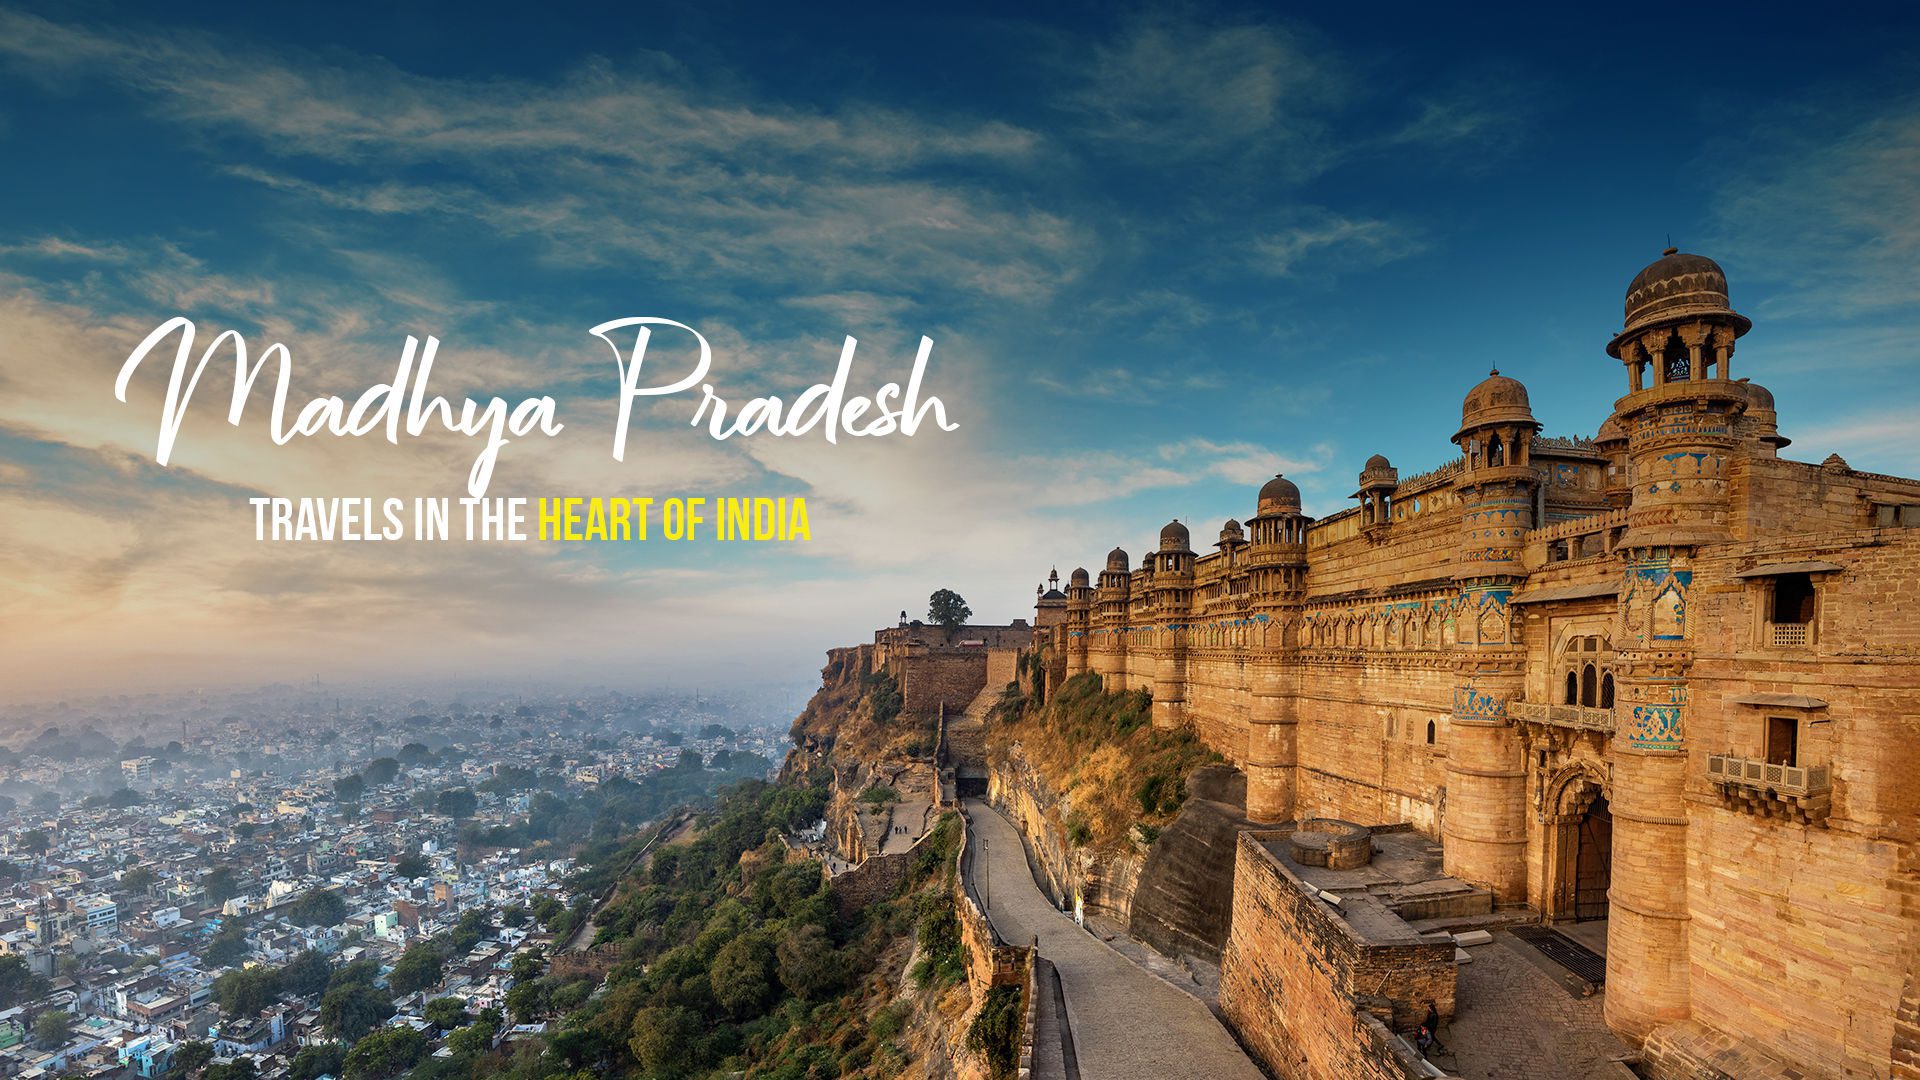 Madhya Pradesh Tourist Places: A Backpacker’s Guide to the Best Places ...